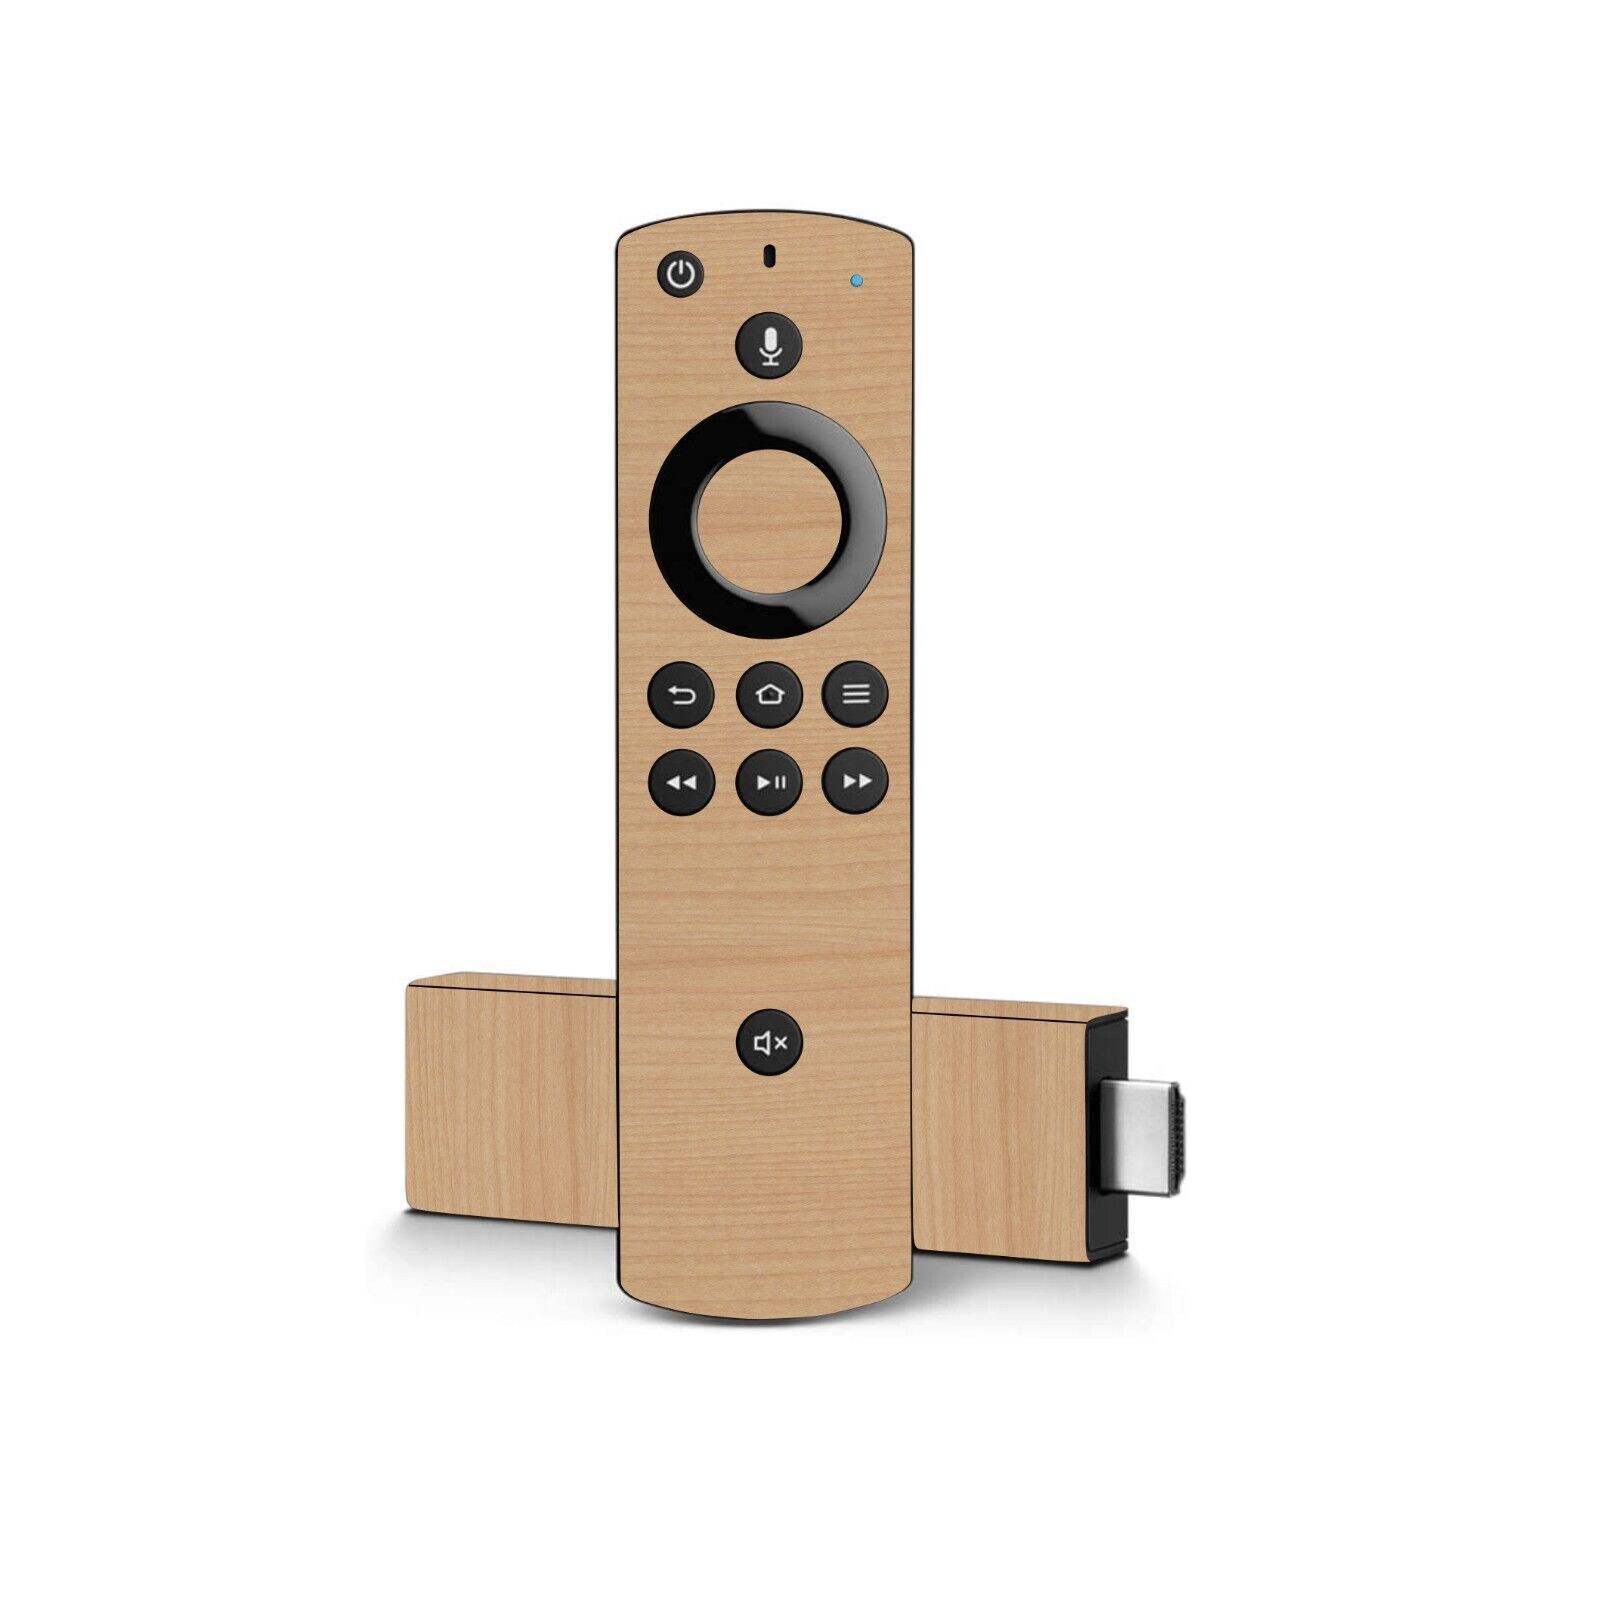 MAPLE WOOD Skin for Amazon Fire Tv Stick + Remote Vinyl Wrap Cover Decal Sticker